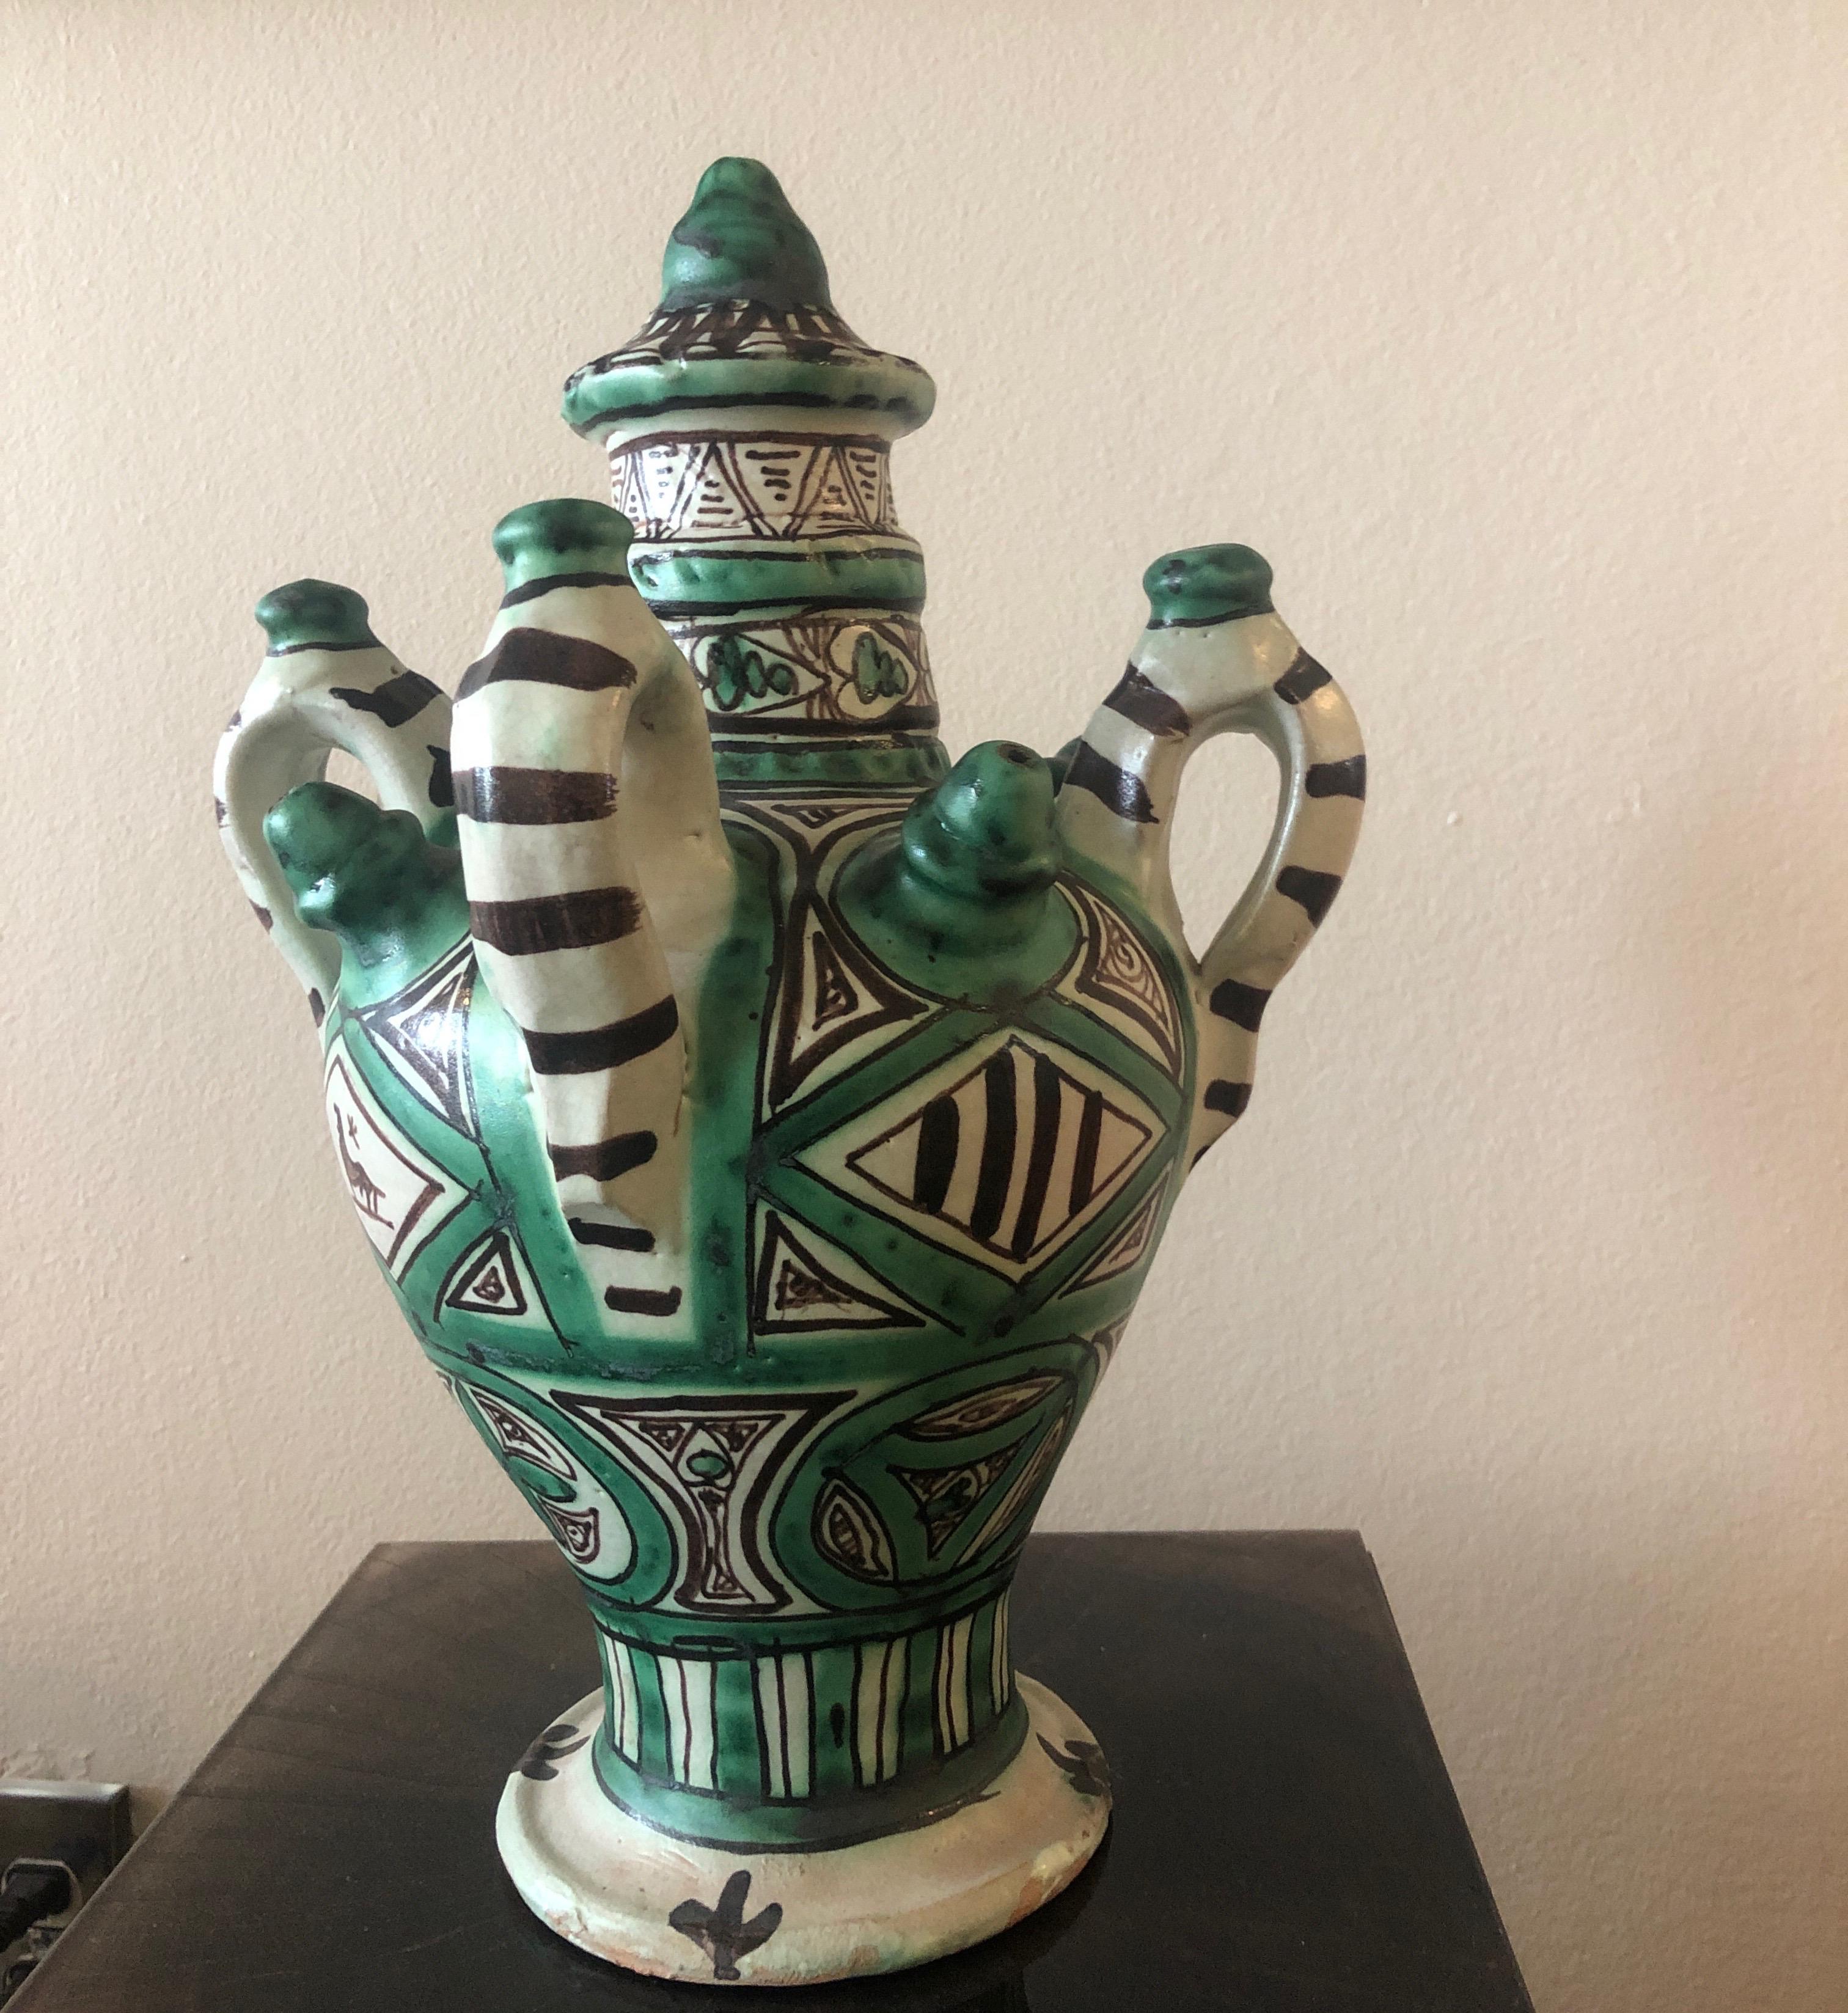 Vintage green and black Mexican Art Pottery with handles.
Size: 11